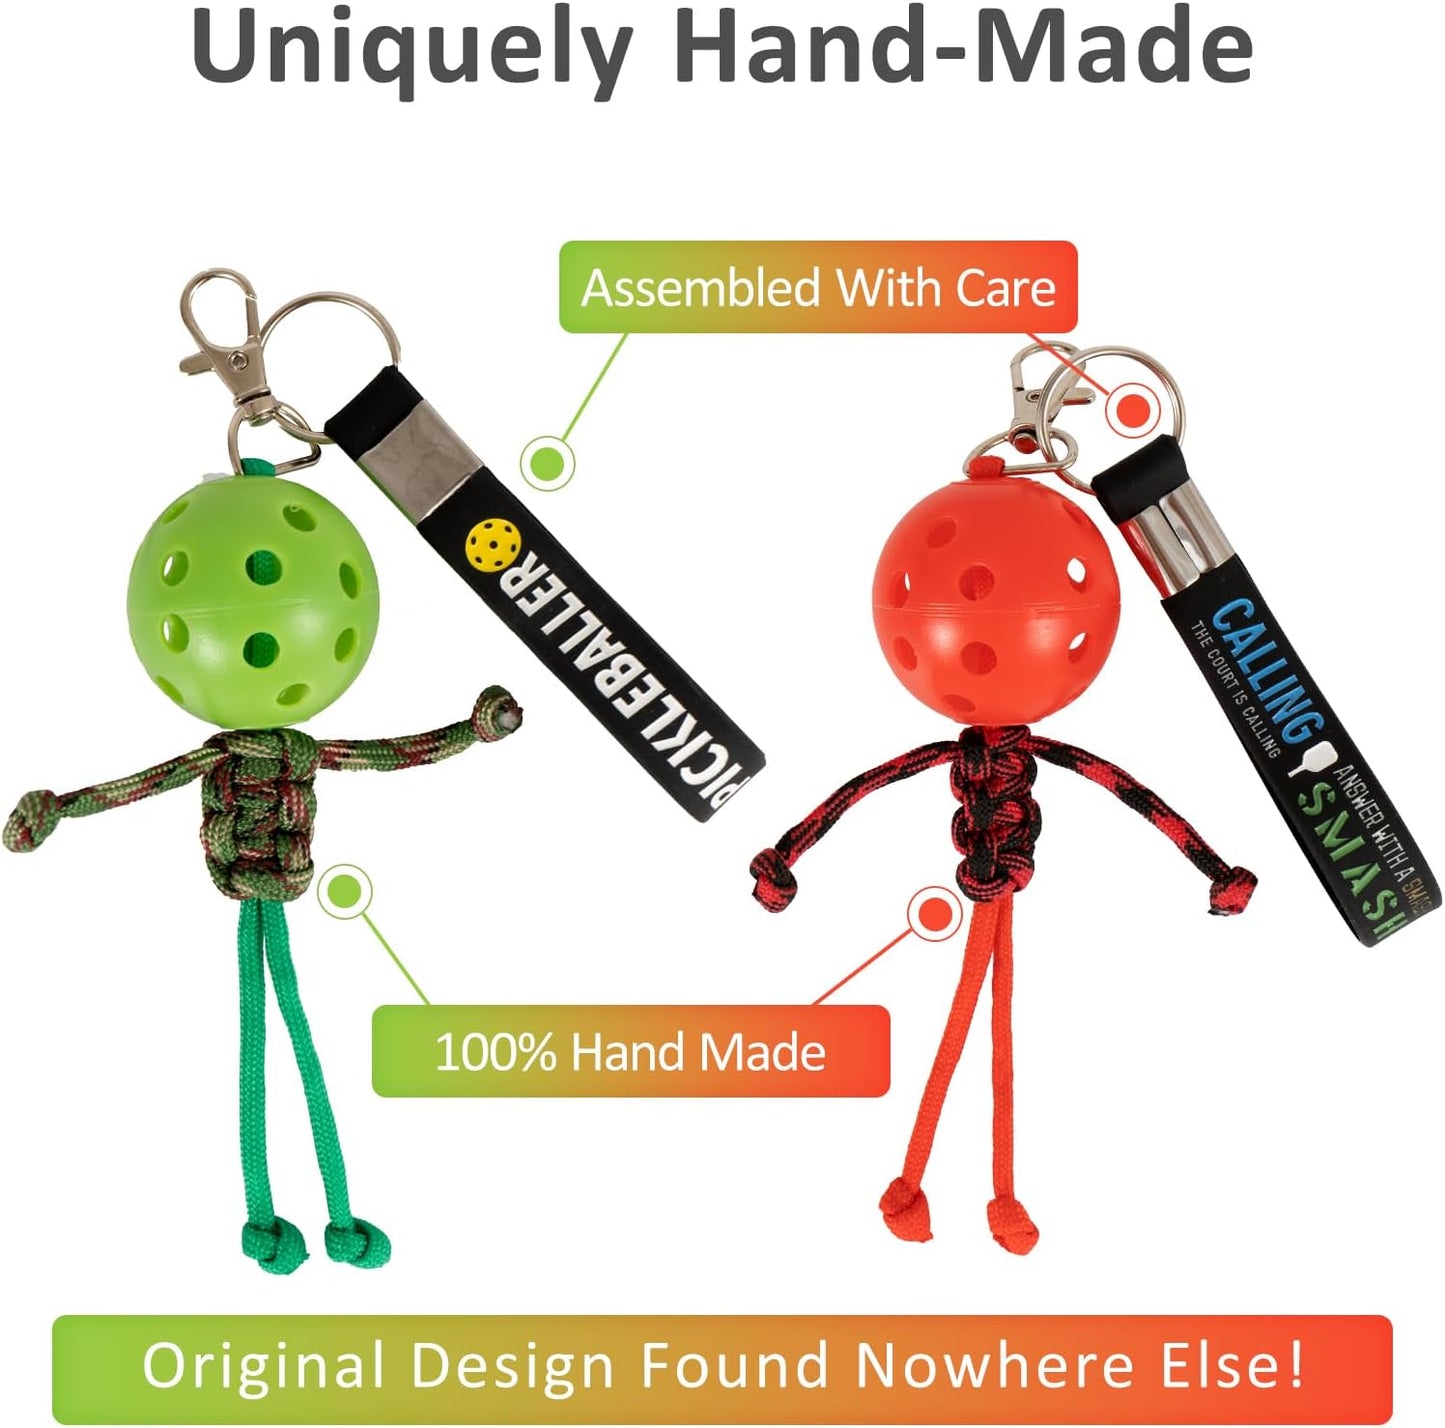 6Pcs Pickleball Handmade Keychains, Inspirational Gifts for Pickleball Lovers Women & Men, Cute Pickleball Ornament Accessories for Sports Bags, Unique Design in 6 Colors